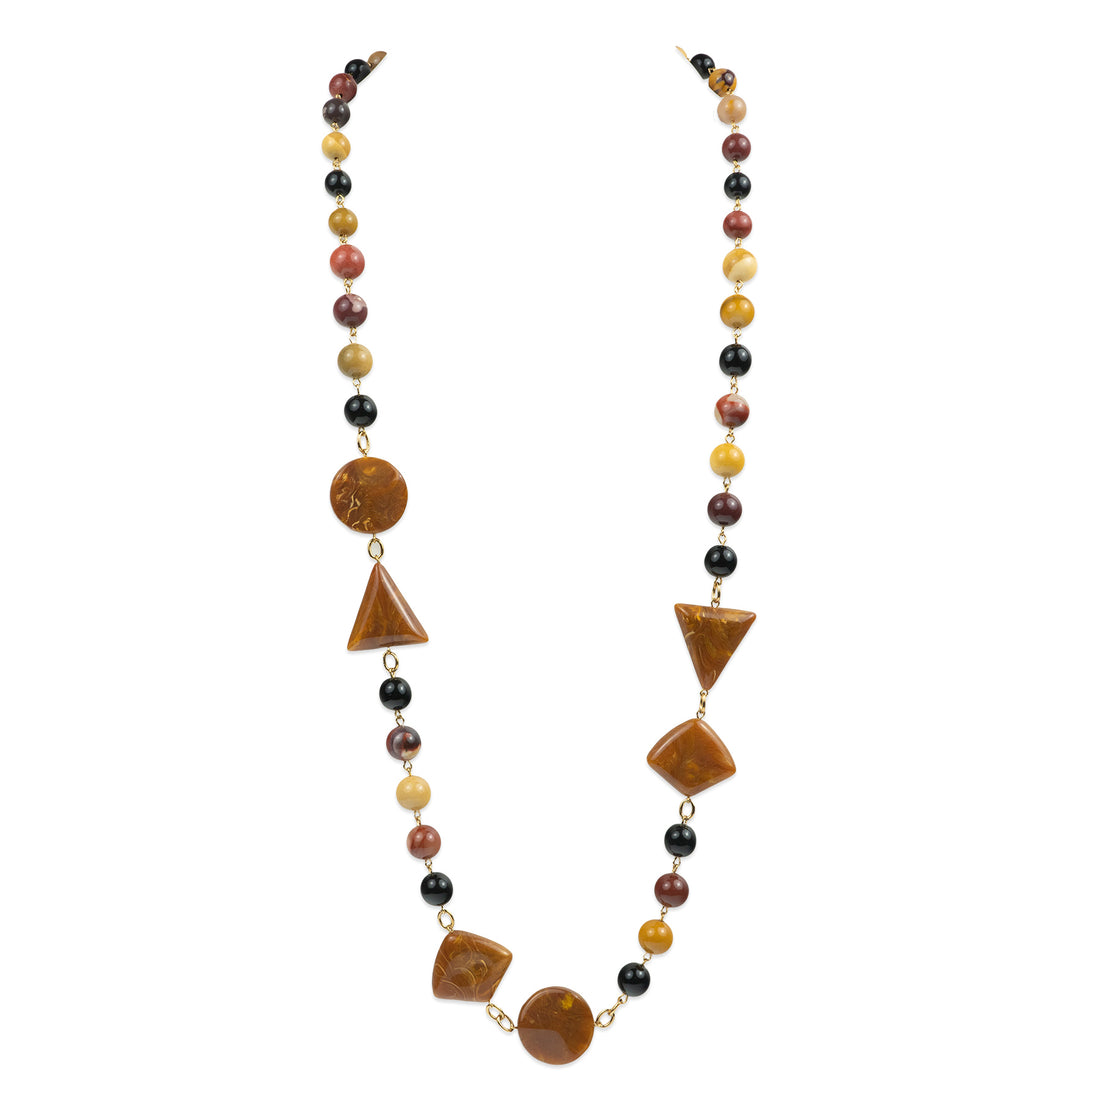 Long necklace of semiprecious stones and resin